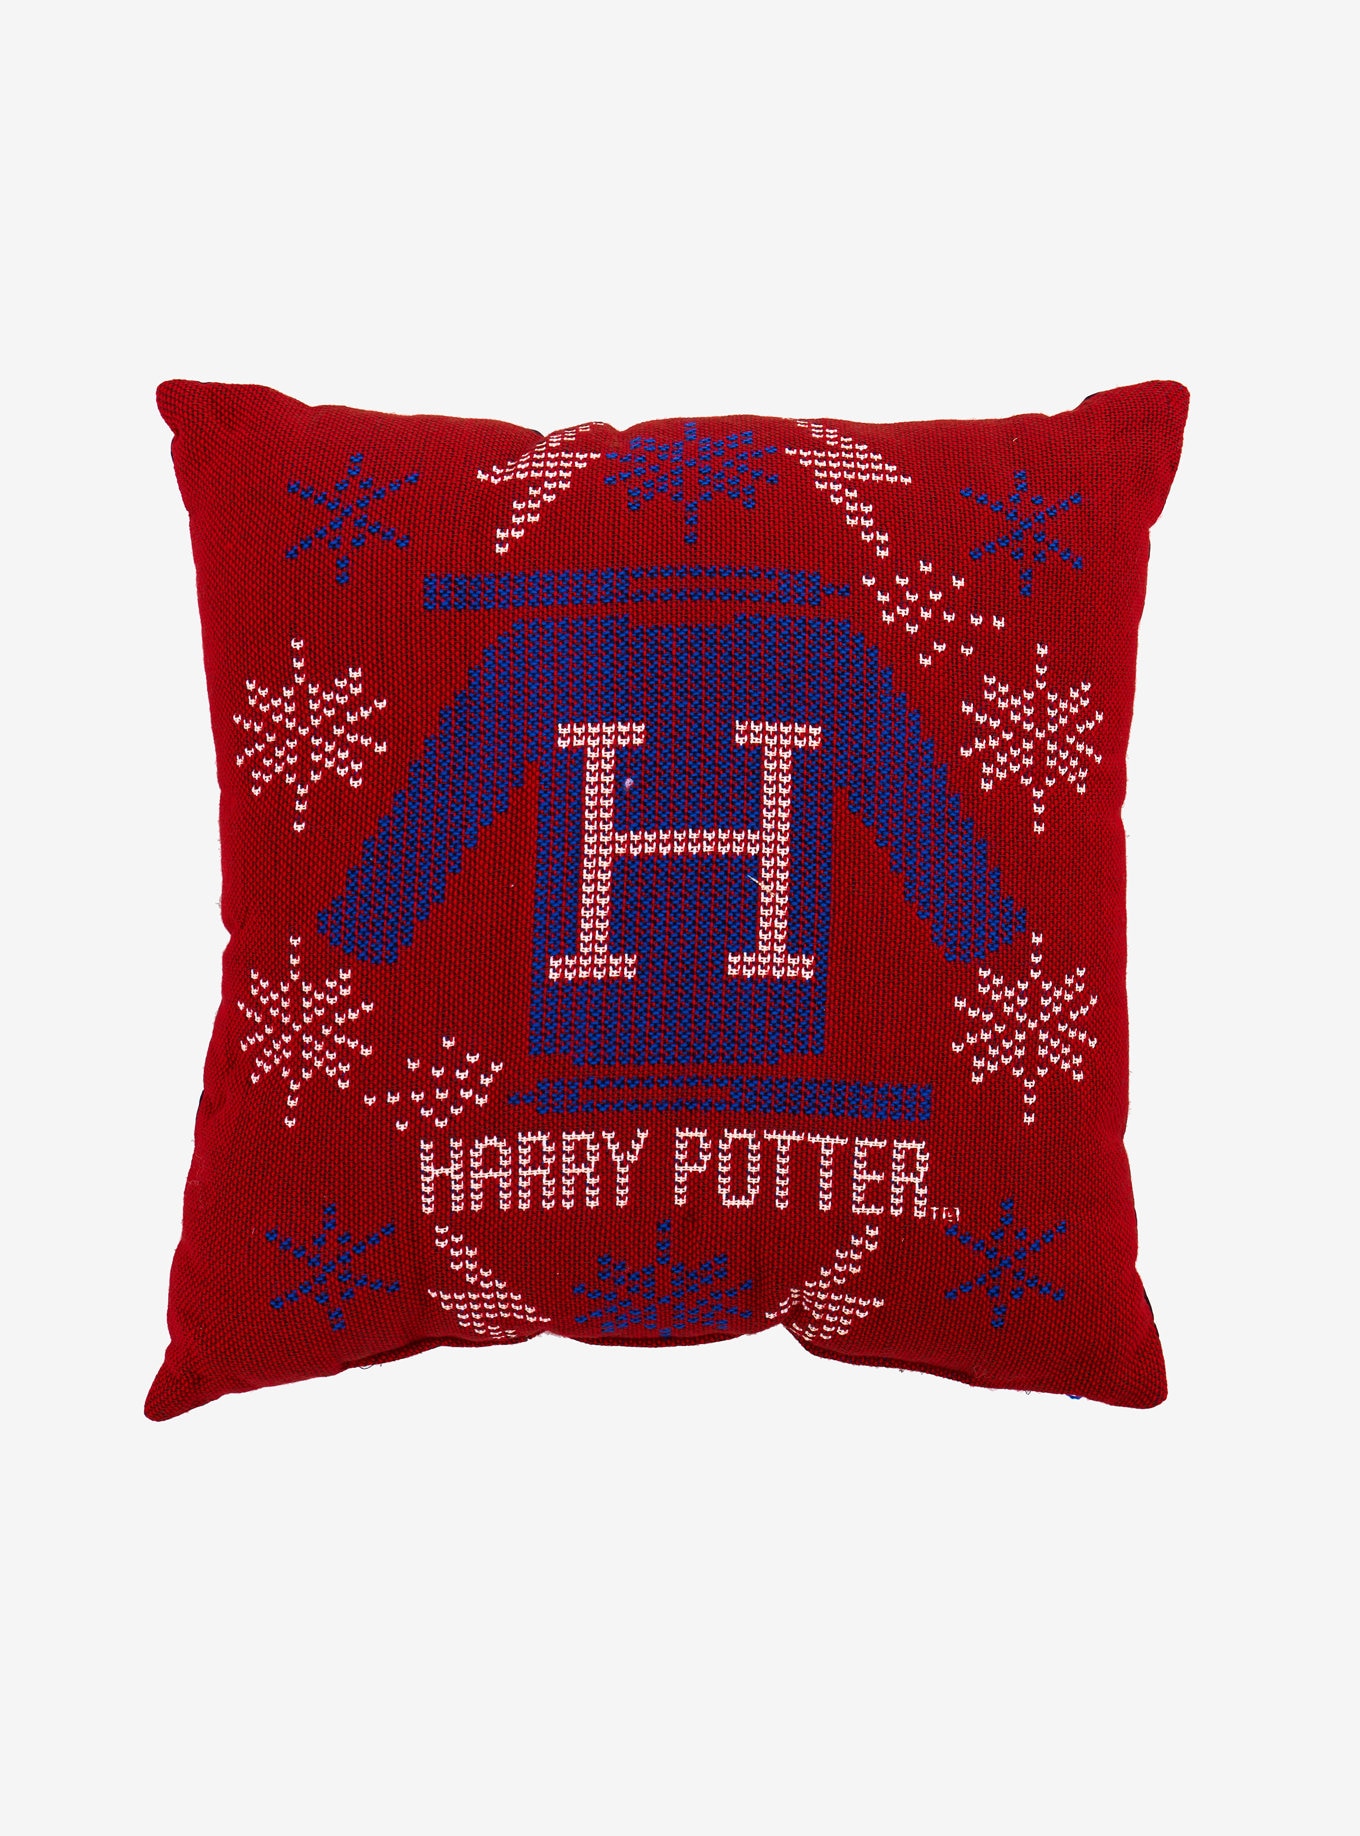 Harry Potter Sweater Tapestry Pillow, $18 @hottopic.com